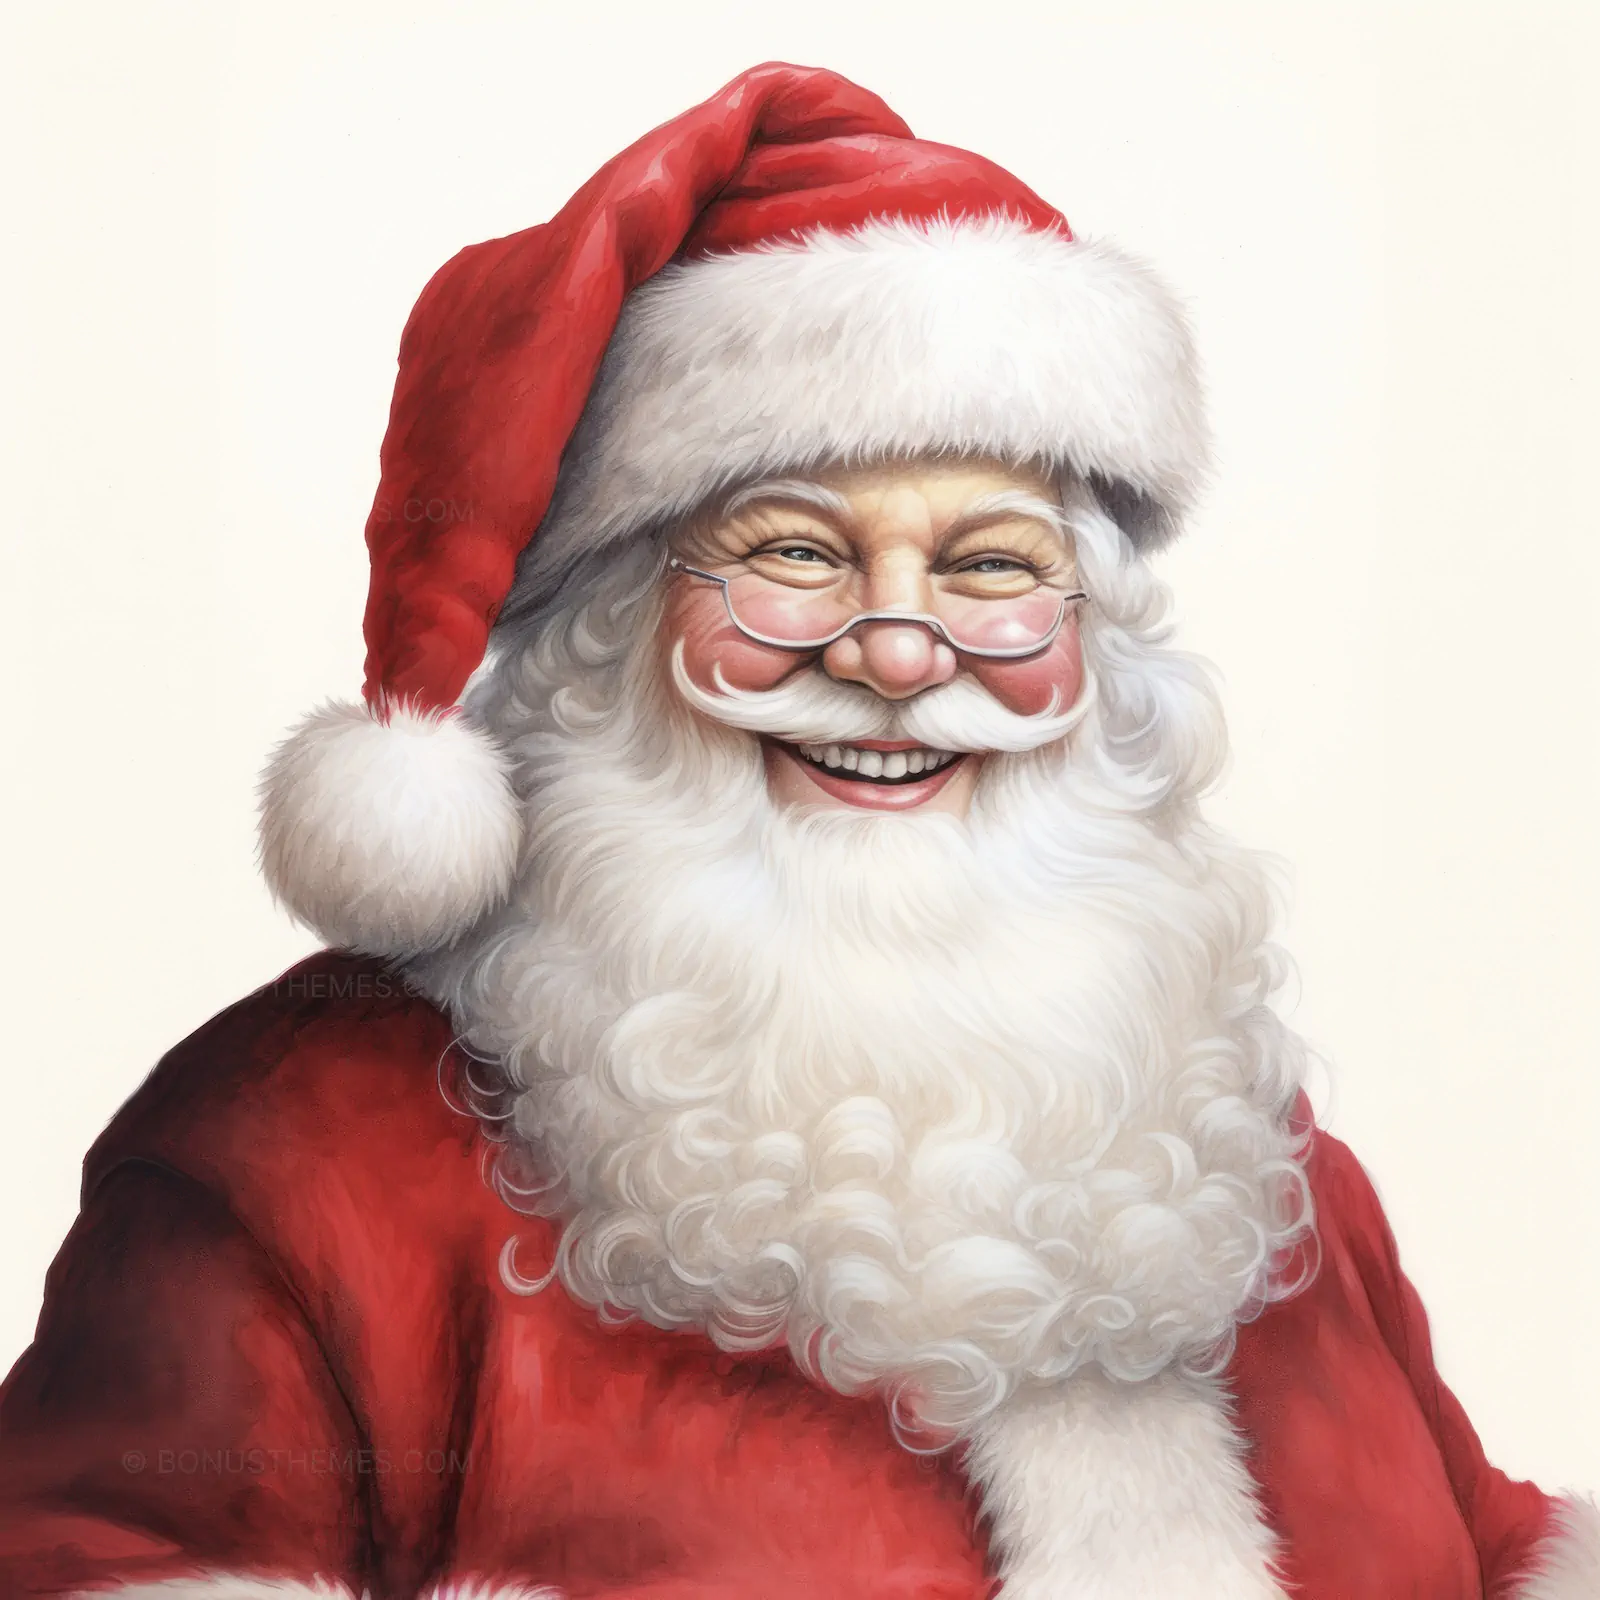 Portrait of smiling Santa Claus on isolated white background